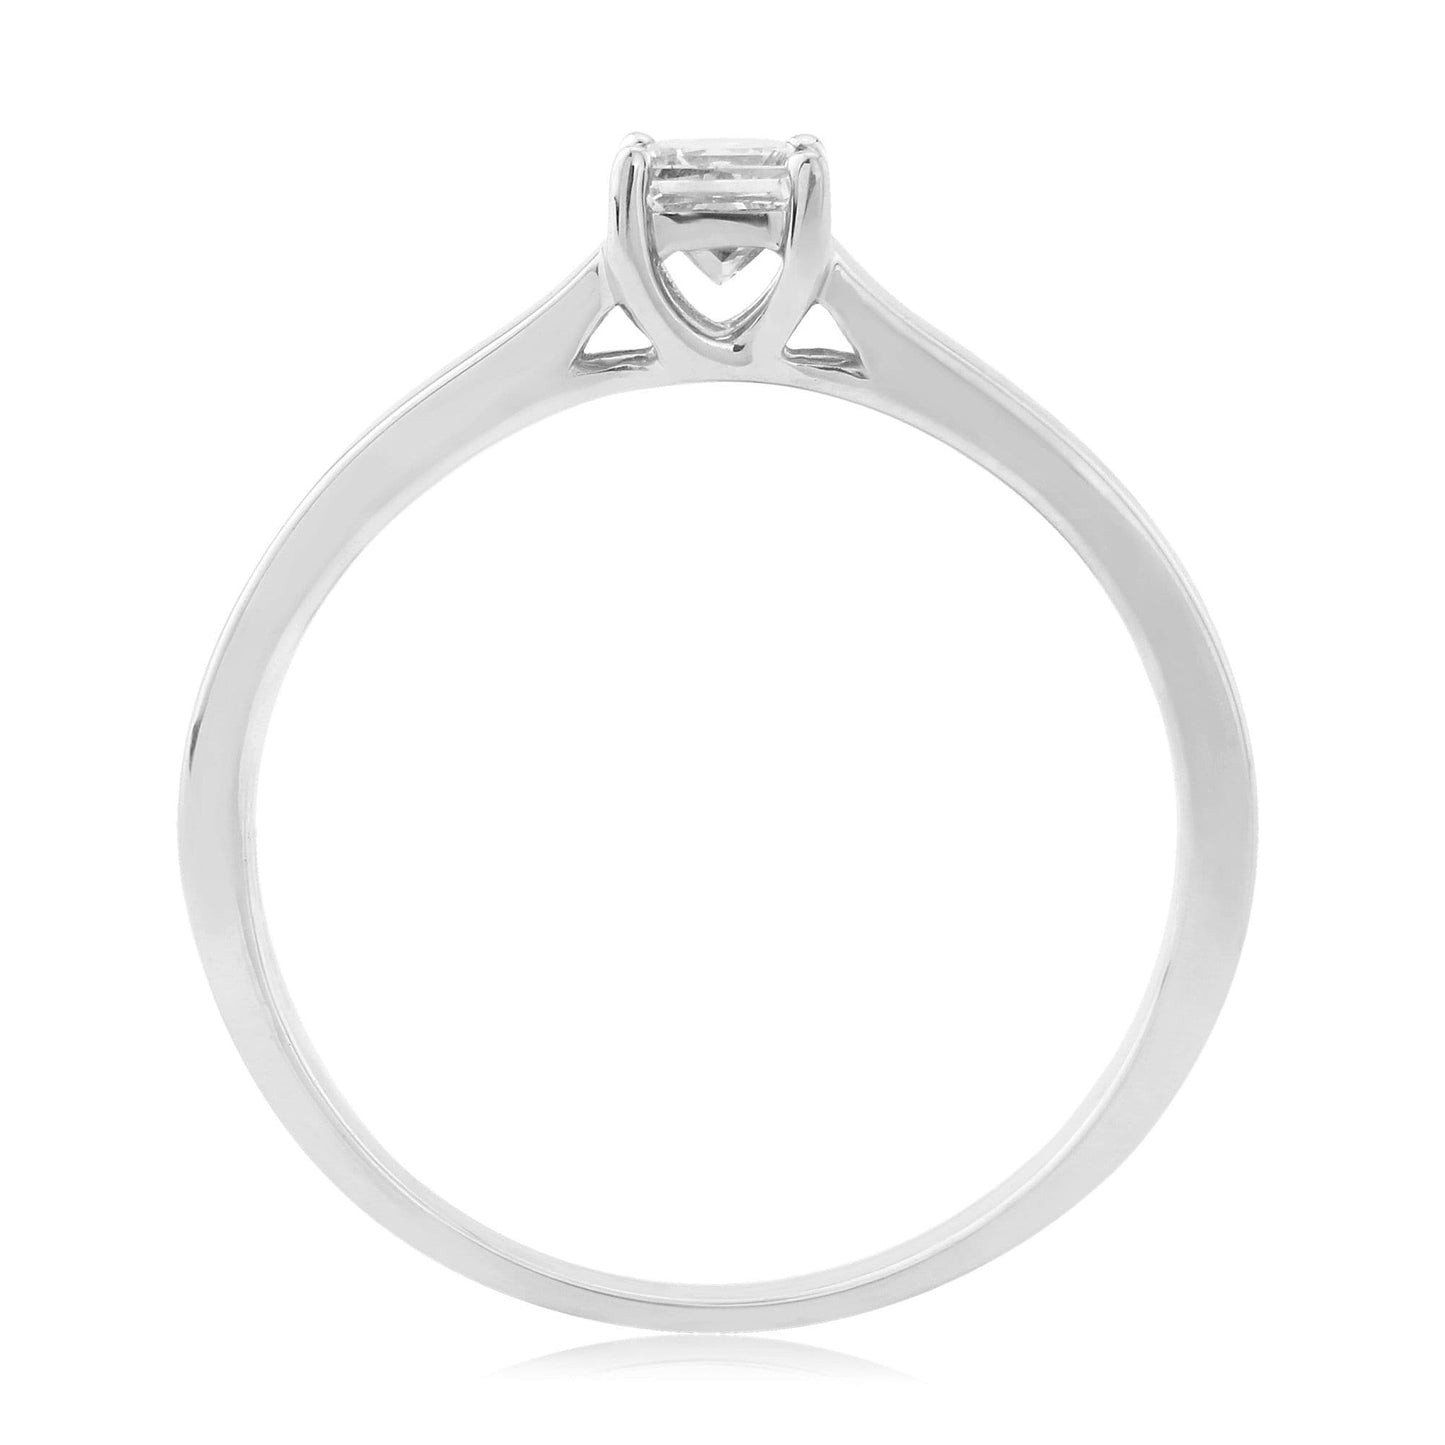 Solitaire Single Stone Four Claw Princess Cut Engagement Ring White Gold 25 Points